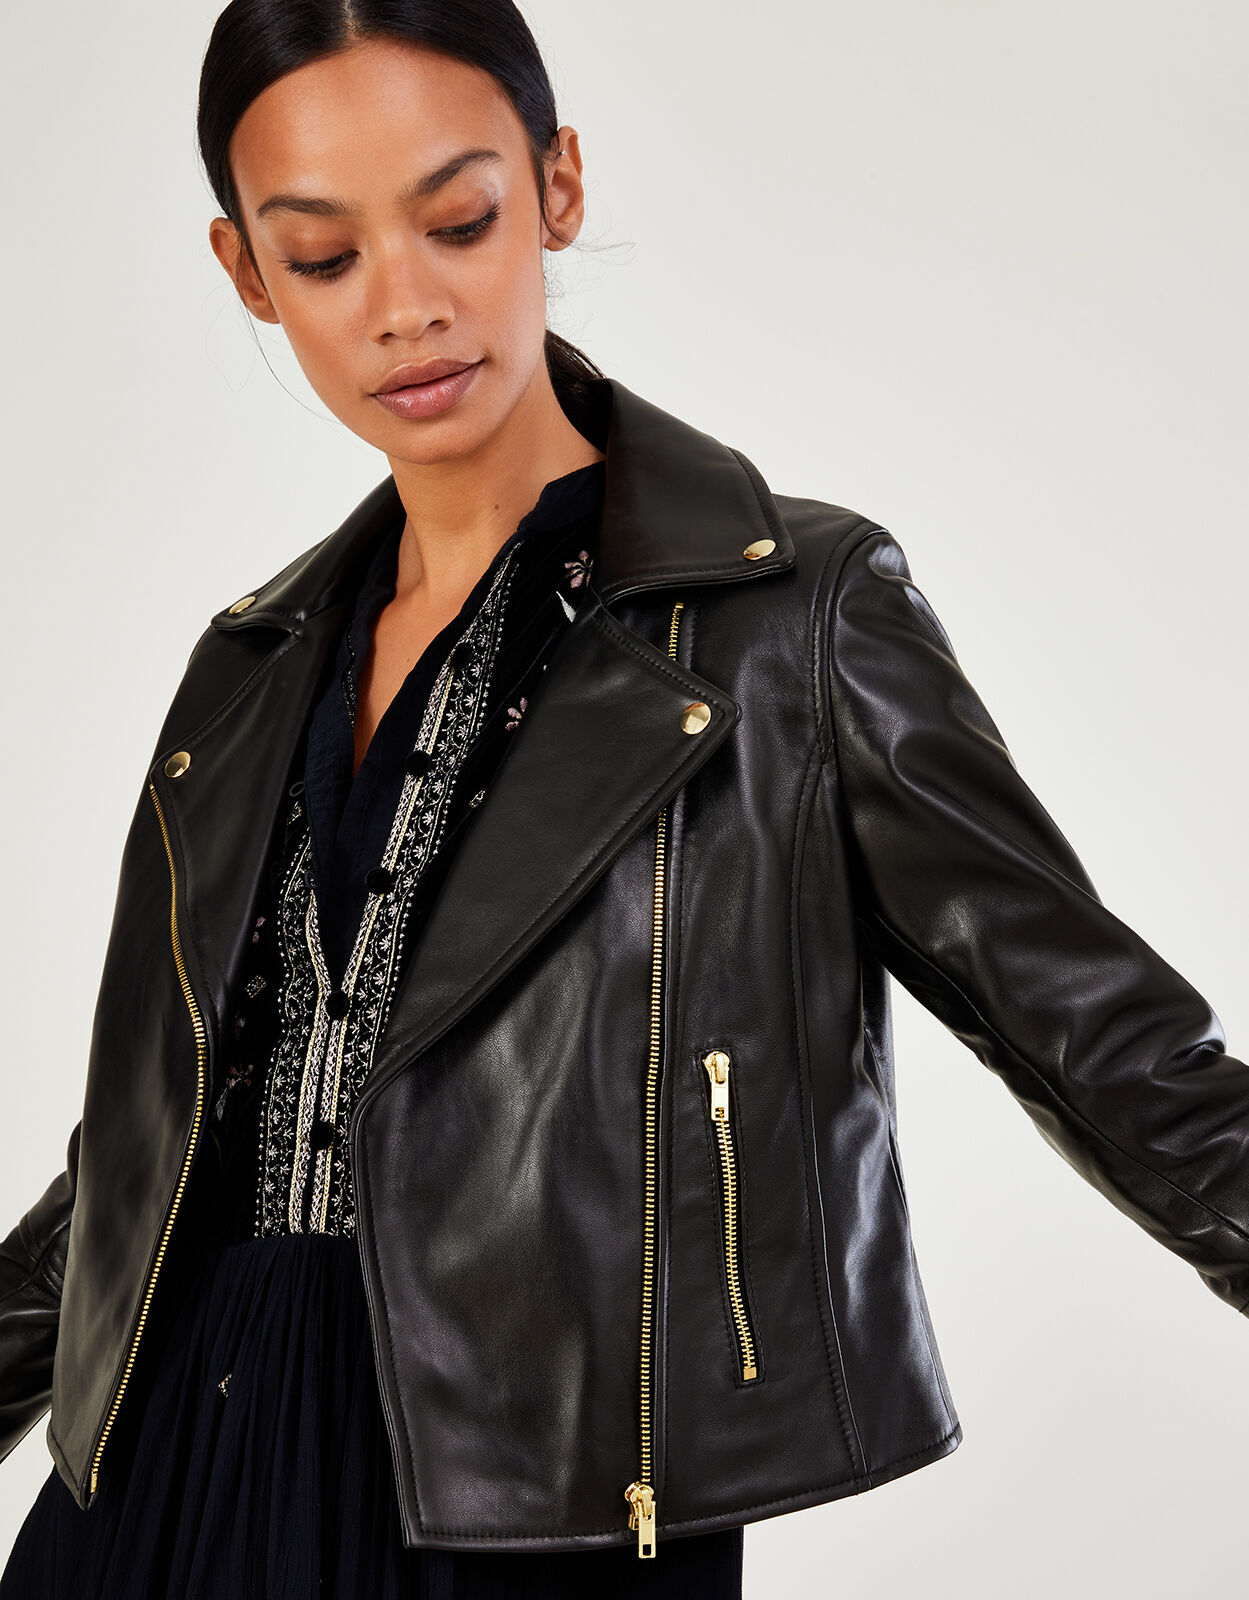 The 18 Best Leather Jackets for Women, According to Stylists and Fashion  Editors | Marie Claire